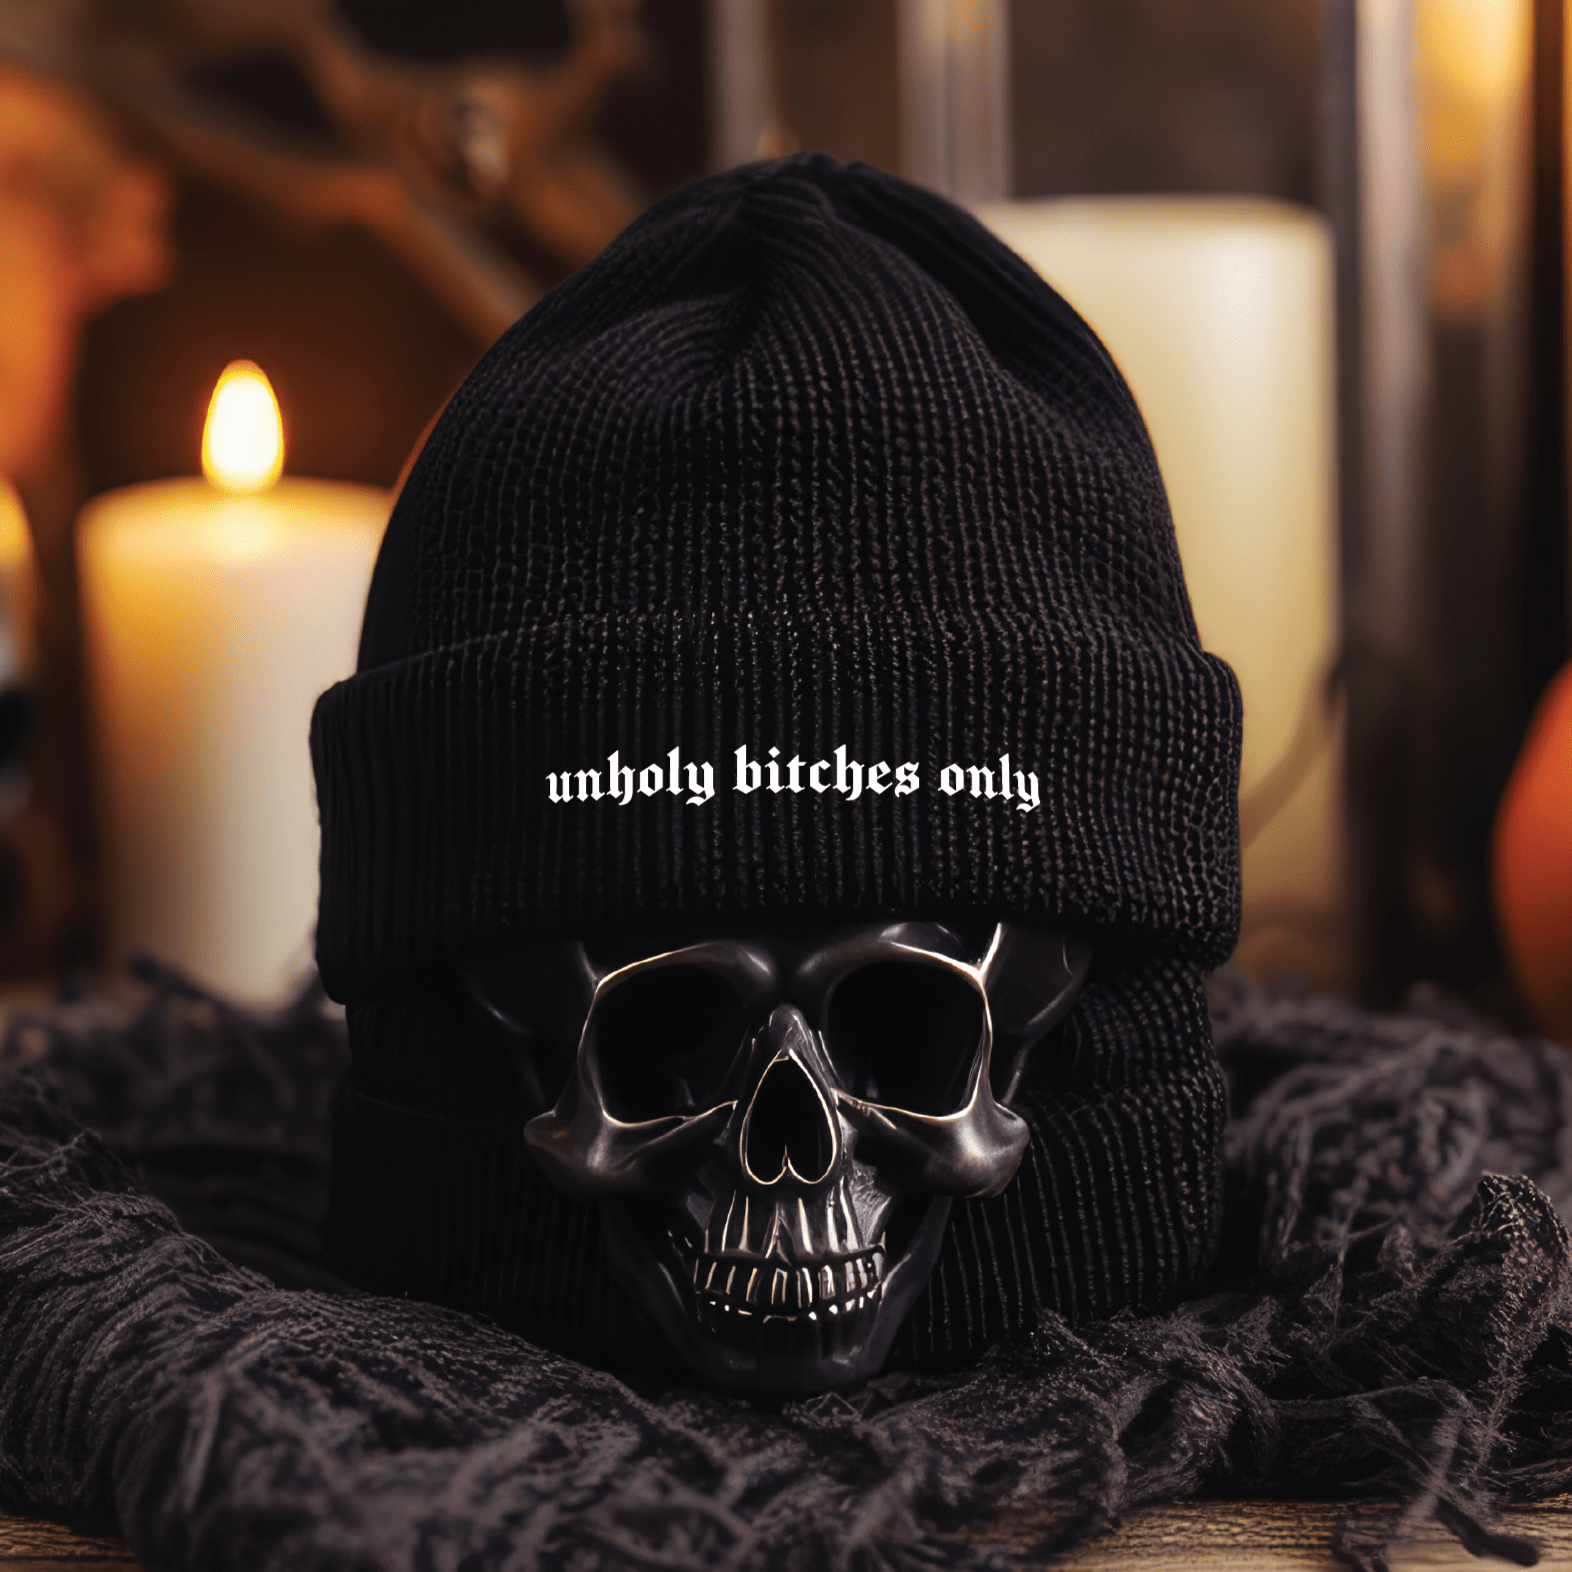 Unholy Bitches Only Knit Beanie - Goth Cloth Co.3584712_8941